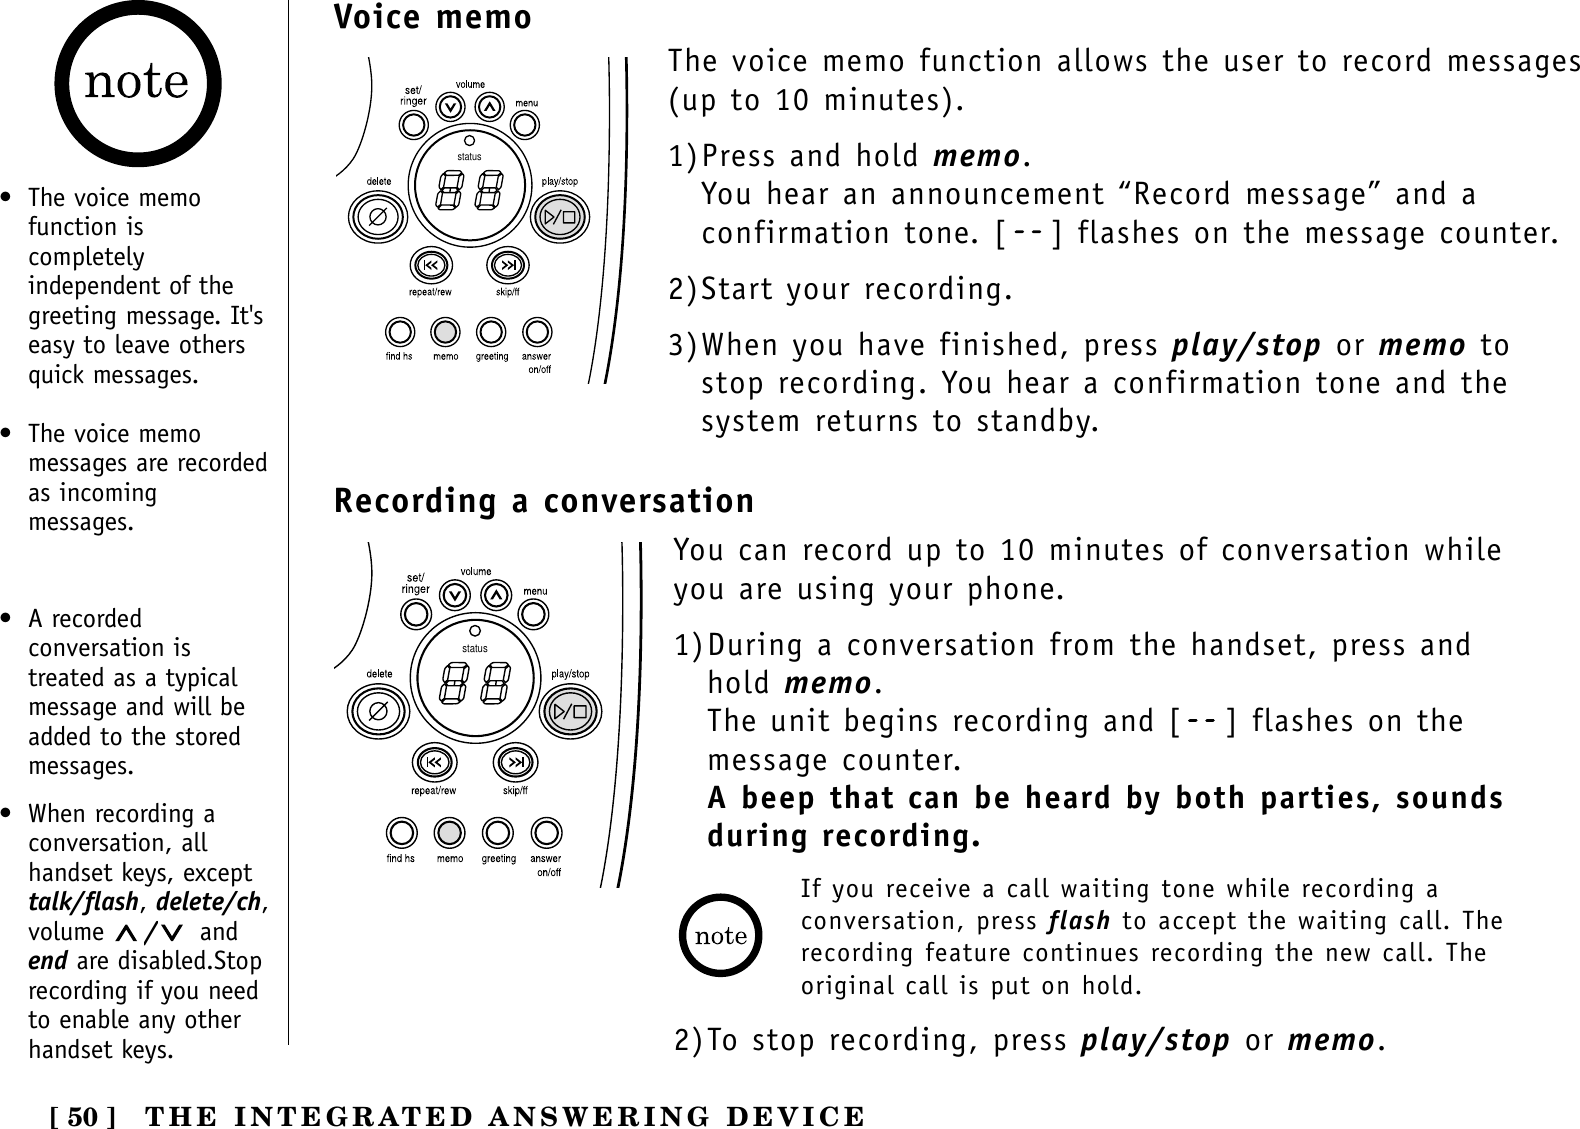 [ 50 ]statusVoice memo• The voice memofunction iscompletelyindependent of thegreeting message. It&apos;seasy to leave othersquick messages.• The voice memomessages are recordedas incomingmessages.The voice memo function allows the user to record messages(up to 10 minutes).1)Press and hold memo. You hear an announcement “Record message” and aconfirmation tone. [ ] flashes on the message counter.2)Start your recording.3)When you have finished, press play/stop or memo tostop recording. You hear a confirmation tone and thesystem returns to standby.THE INTEGRATED ANSWERING DEVICERecording a conversationstatusYou can record up to 10 minutes of conversation whileyou are using your phone.1)During a conversation from the handset, press andhold memo. The unit begins recording and [ ] flashes on themessage counter.A beep that can be heard by both parties, sounds during recording.If you receive a call waiting tone while recording aconversation, press flash to accept the waiting call. Therecording feature continues recording the new call. Theoriginal call is put on hold.2)To stop recording, press play/stop or memo.• A recordedconversation istreated as a typicalmessage and will beadded to the storedmessages.• When recording aconversation, allhandset keys, excepttalk/flash, delete/ch,volume  /andend are disabled.Stoprecording if you needto enable any otherhandset keys.